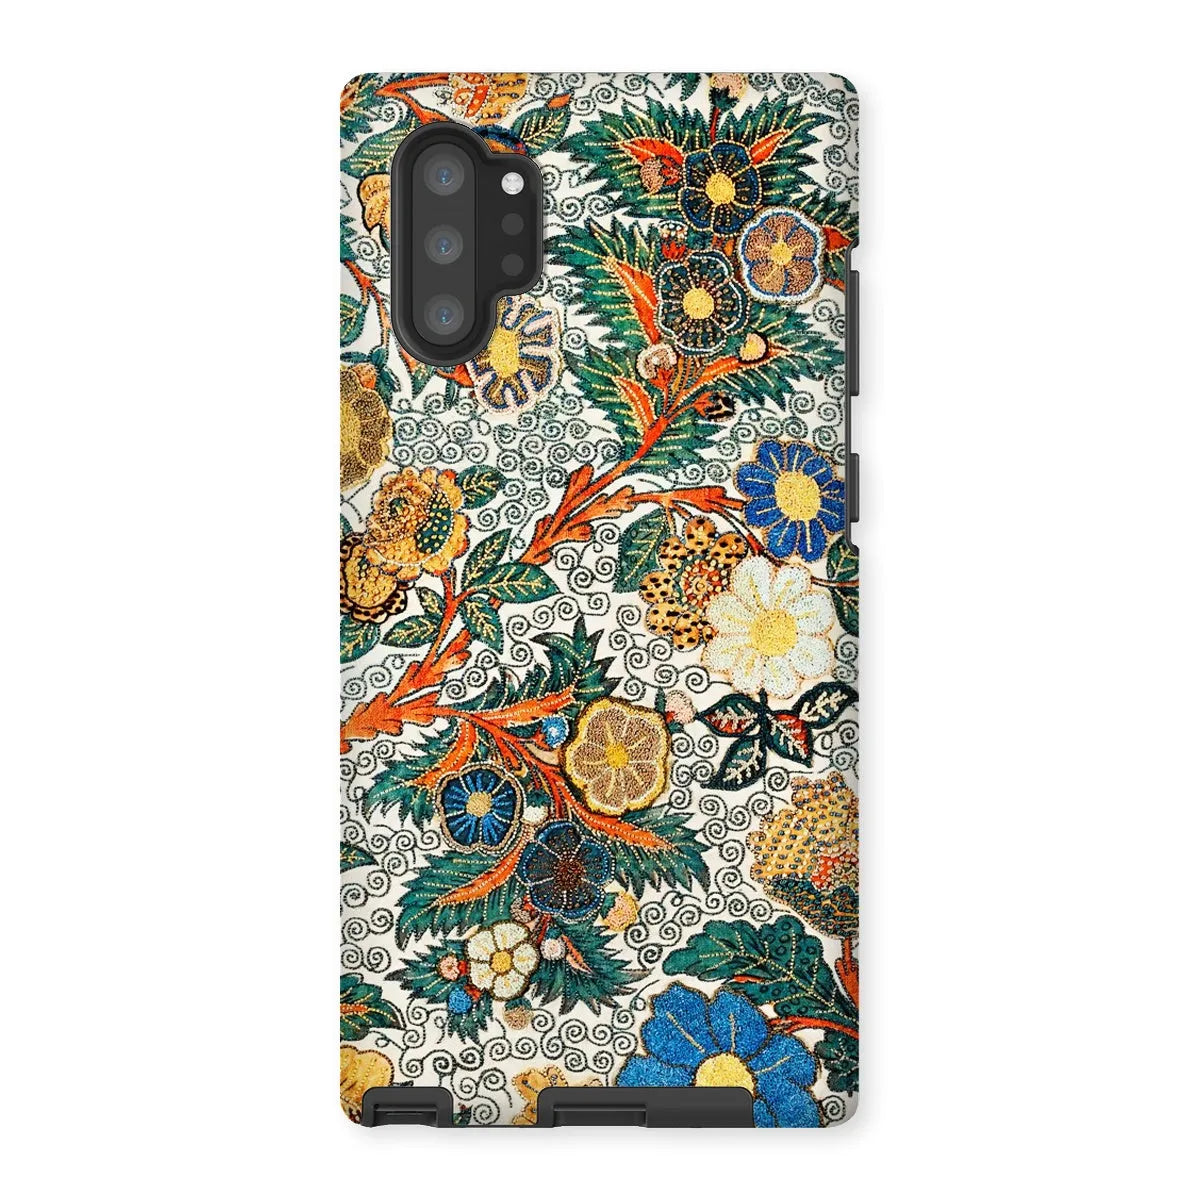 Blossomewhere Japanese Tapestry Art Phone Case - Samsung Galaxy Note 10p / Matte - Mobile Phone Cases - Aesthetic Art